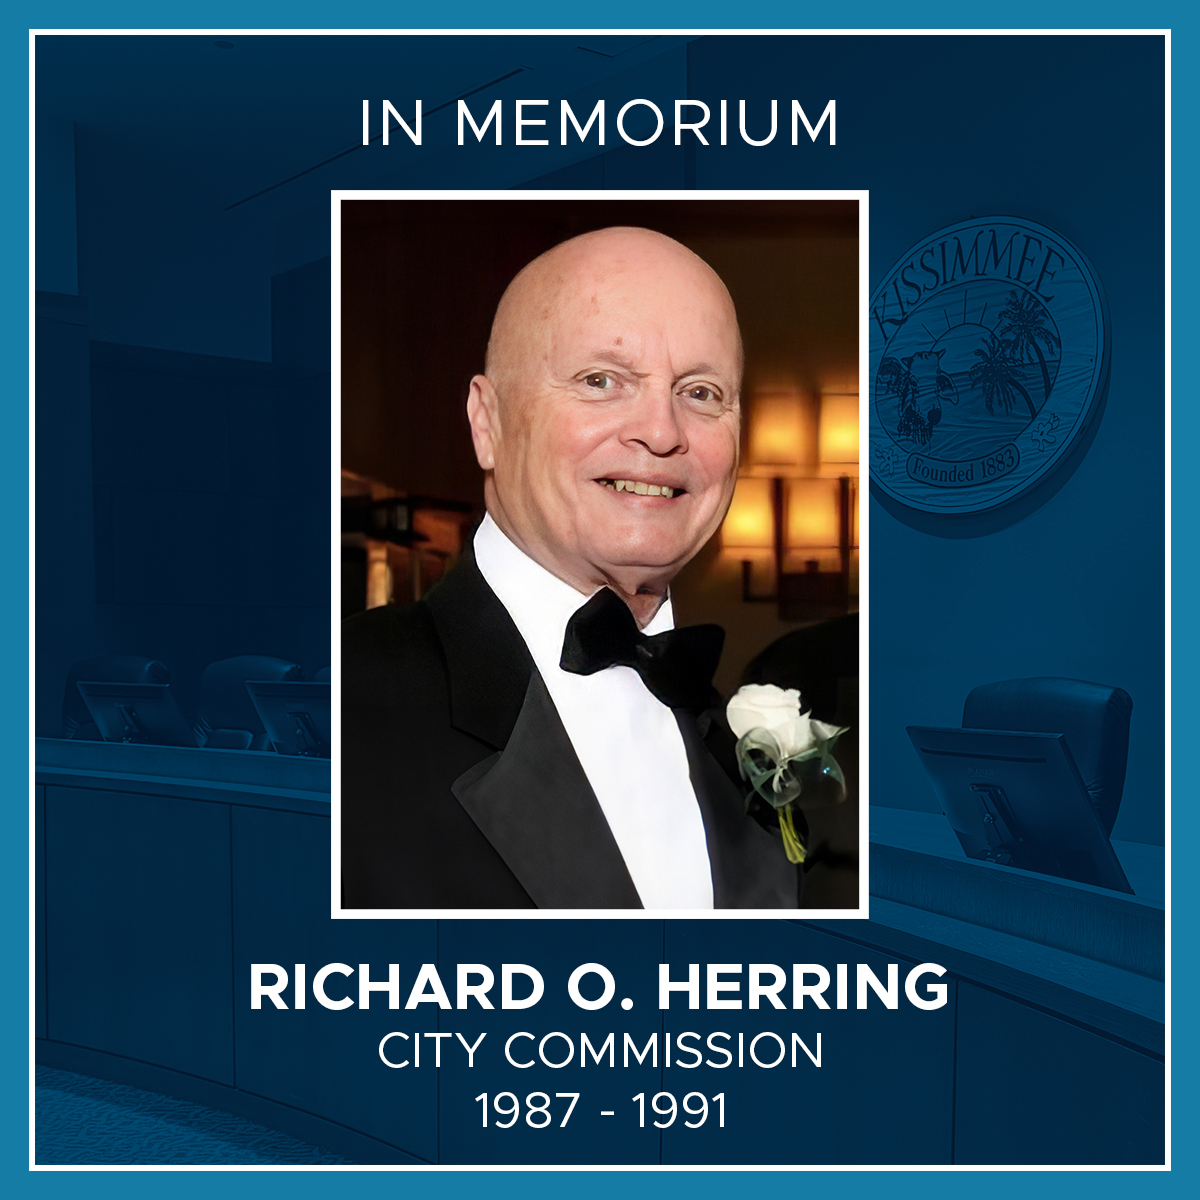 Today, we bid farewell to former City of Kissimmee Commissioner Richard Herring, a dedicated public servant who shaped our city's history. From critical roles in city boards to co-founding the Bataan-Corregidor Memorial, his legacy will forever inspire us.